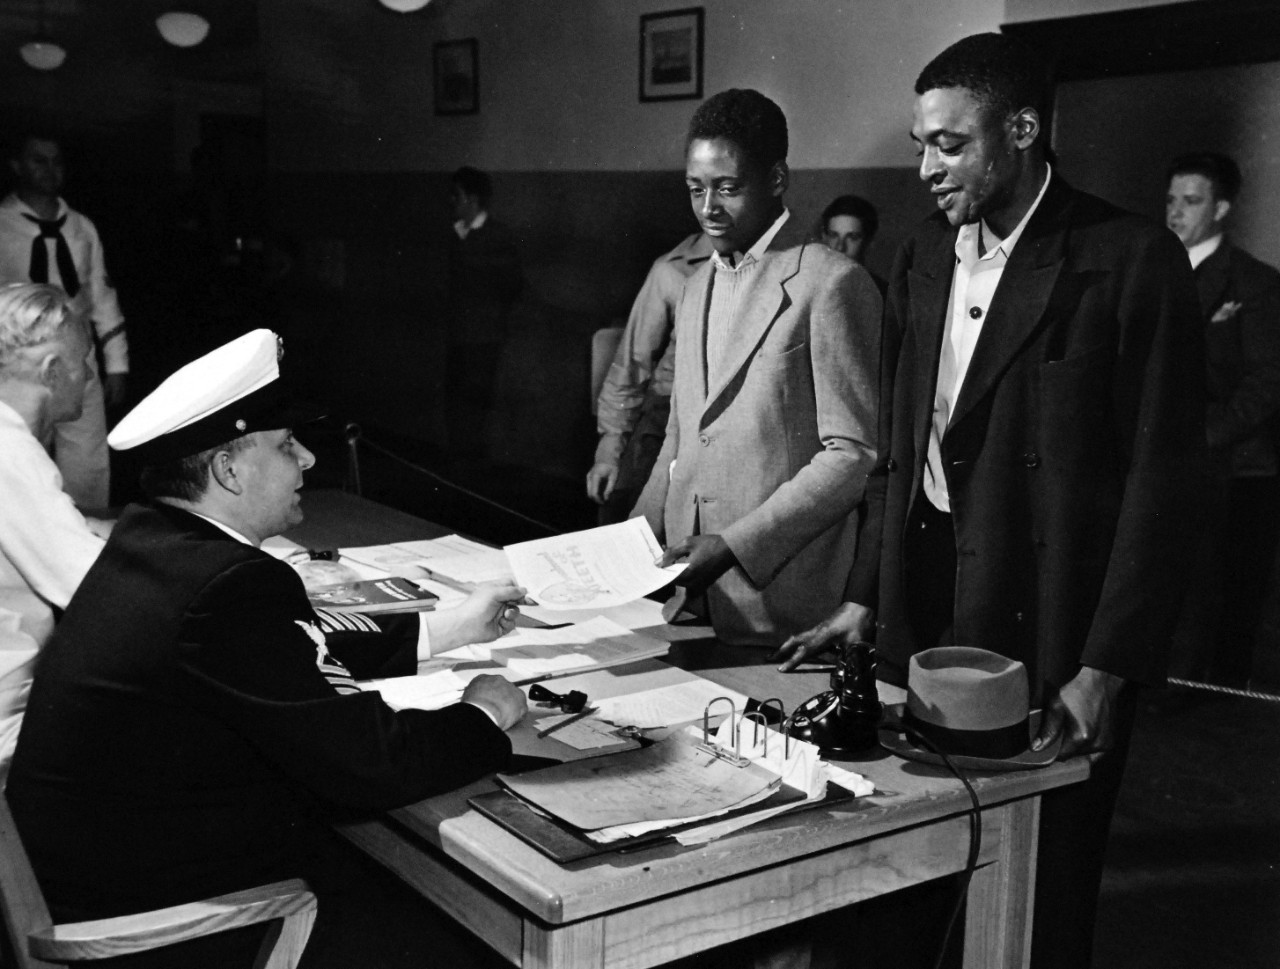 80-CF-882-2_Box 175: First African Americans Sworn in for Clerical Service, 1942.   Original caption, “First African-Americans Sworn in for Clerical Service.”  Walter Hurtt, accompanied by his father Wyoming Hurtt, gets enlistment data at U.S. Navy Recruiting Station, 67 Broad Street, New York.  Hurtt was one of the first African-Americans to apply under the Navy’s new rule allowing African-Americans to enlist in other than mess attendant’s capacity.  Possibly summer of 1942.  Official U.S. Navy photograph, now in the collections of the National Archives Note, this photograph has not been fully verified.   